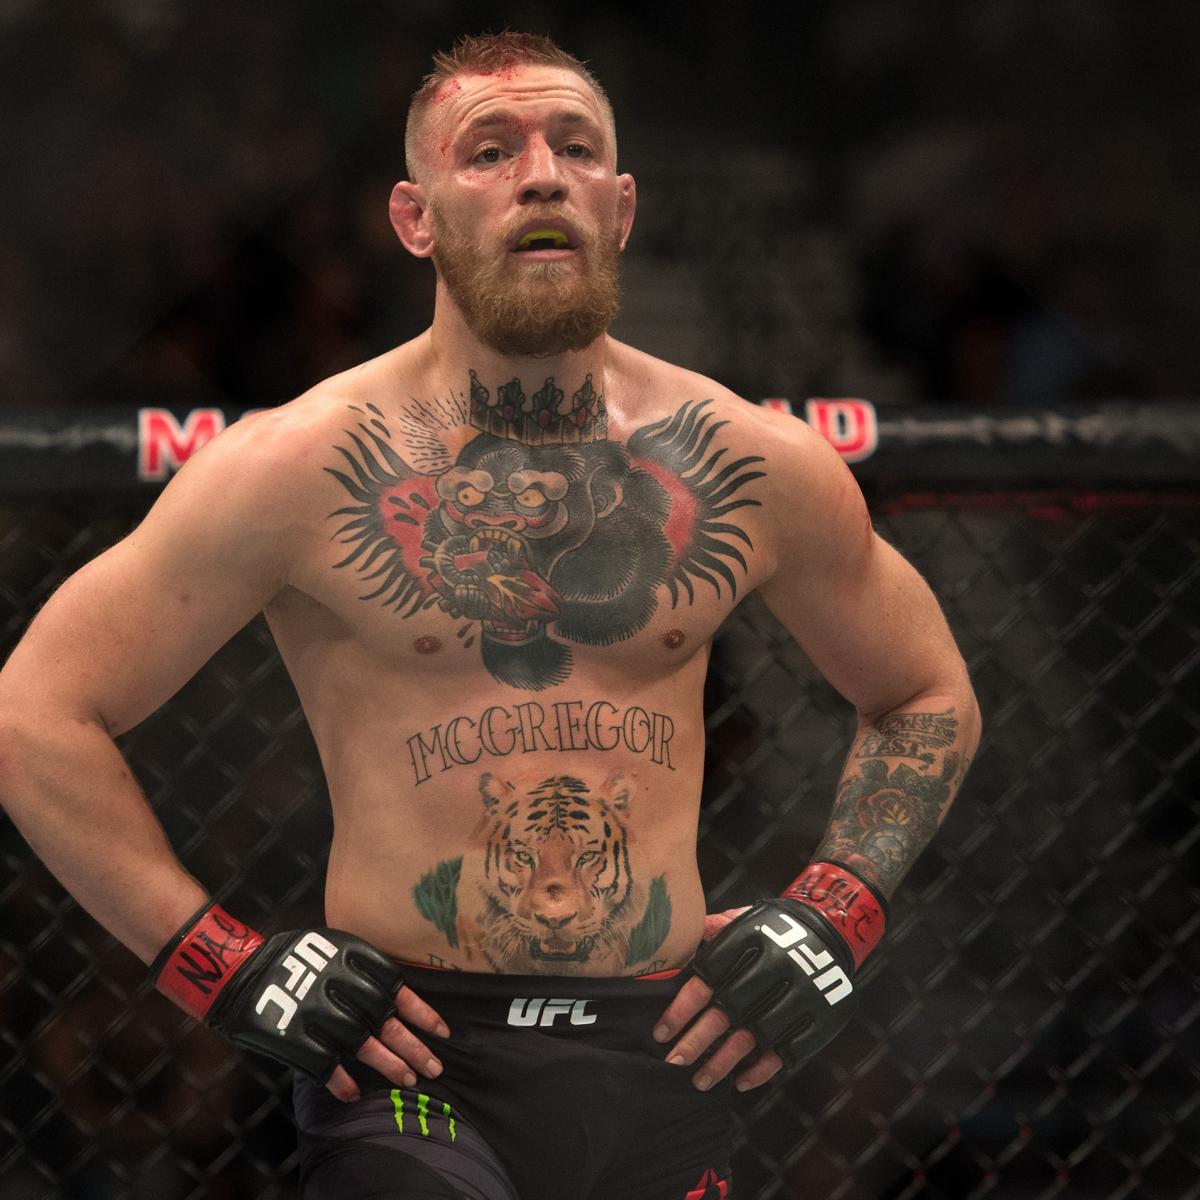 In Conor McGregor vs. UFC, the Fight Was Fixed but Not Fruitless | Bleacher Report ...